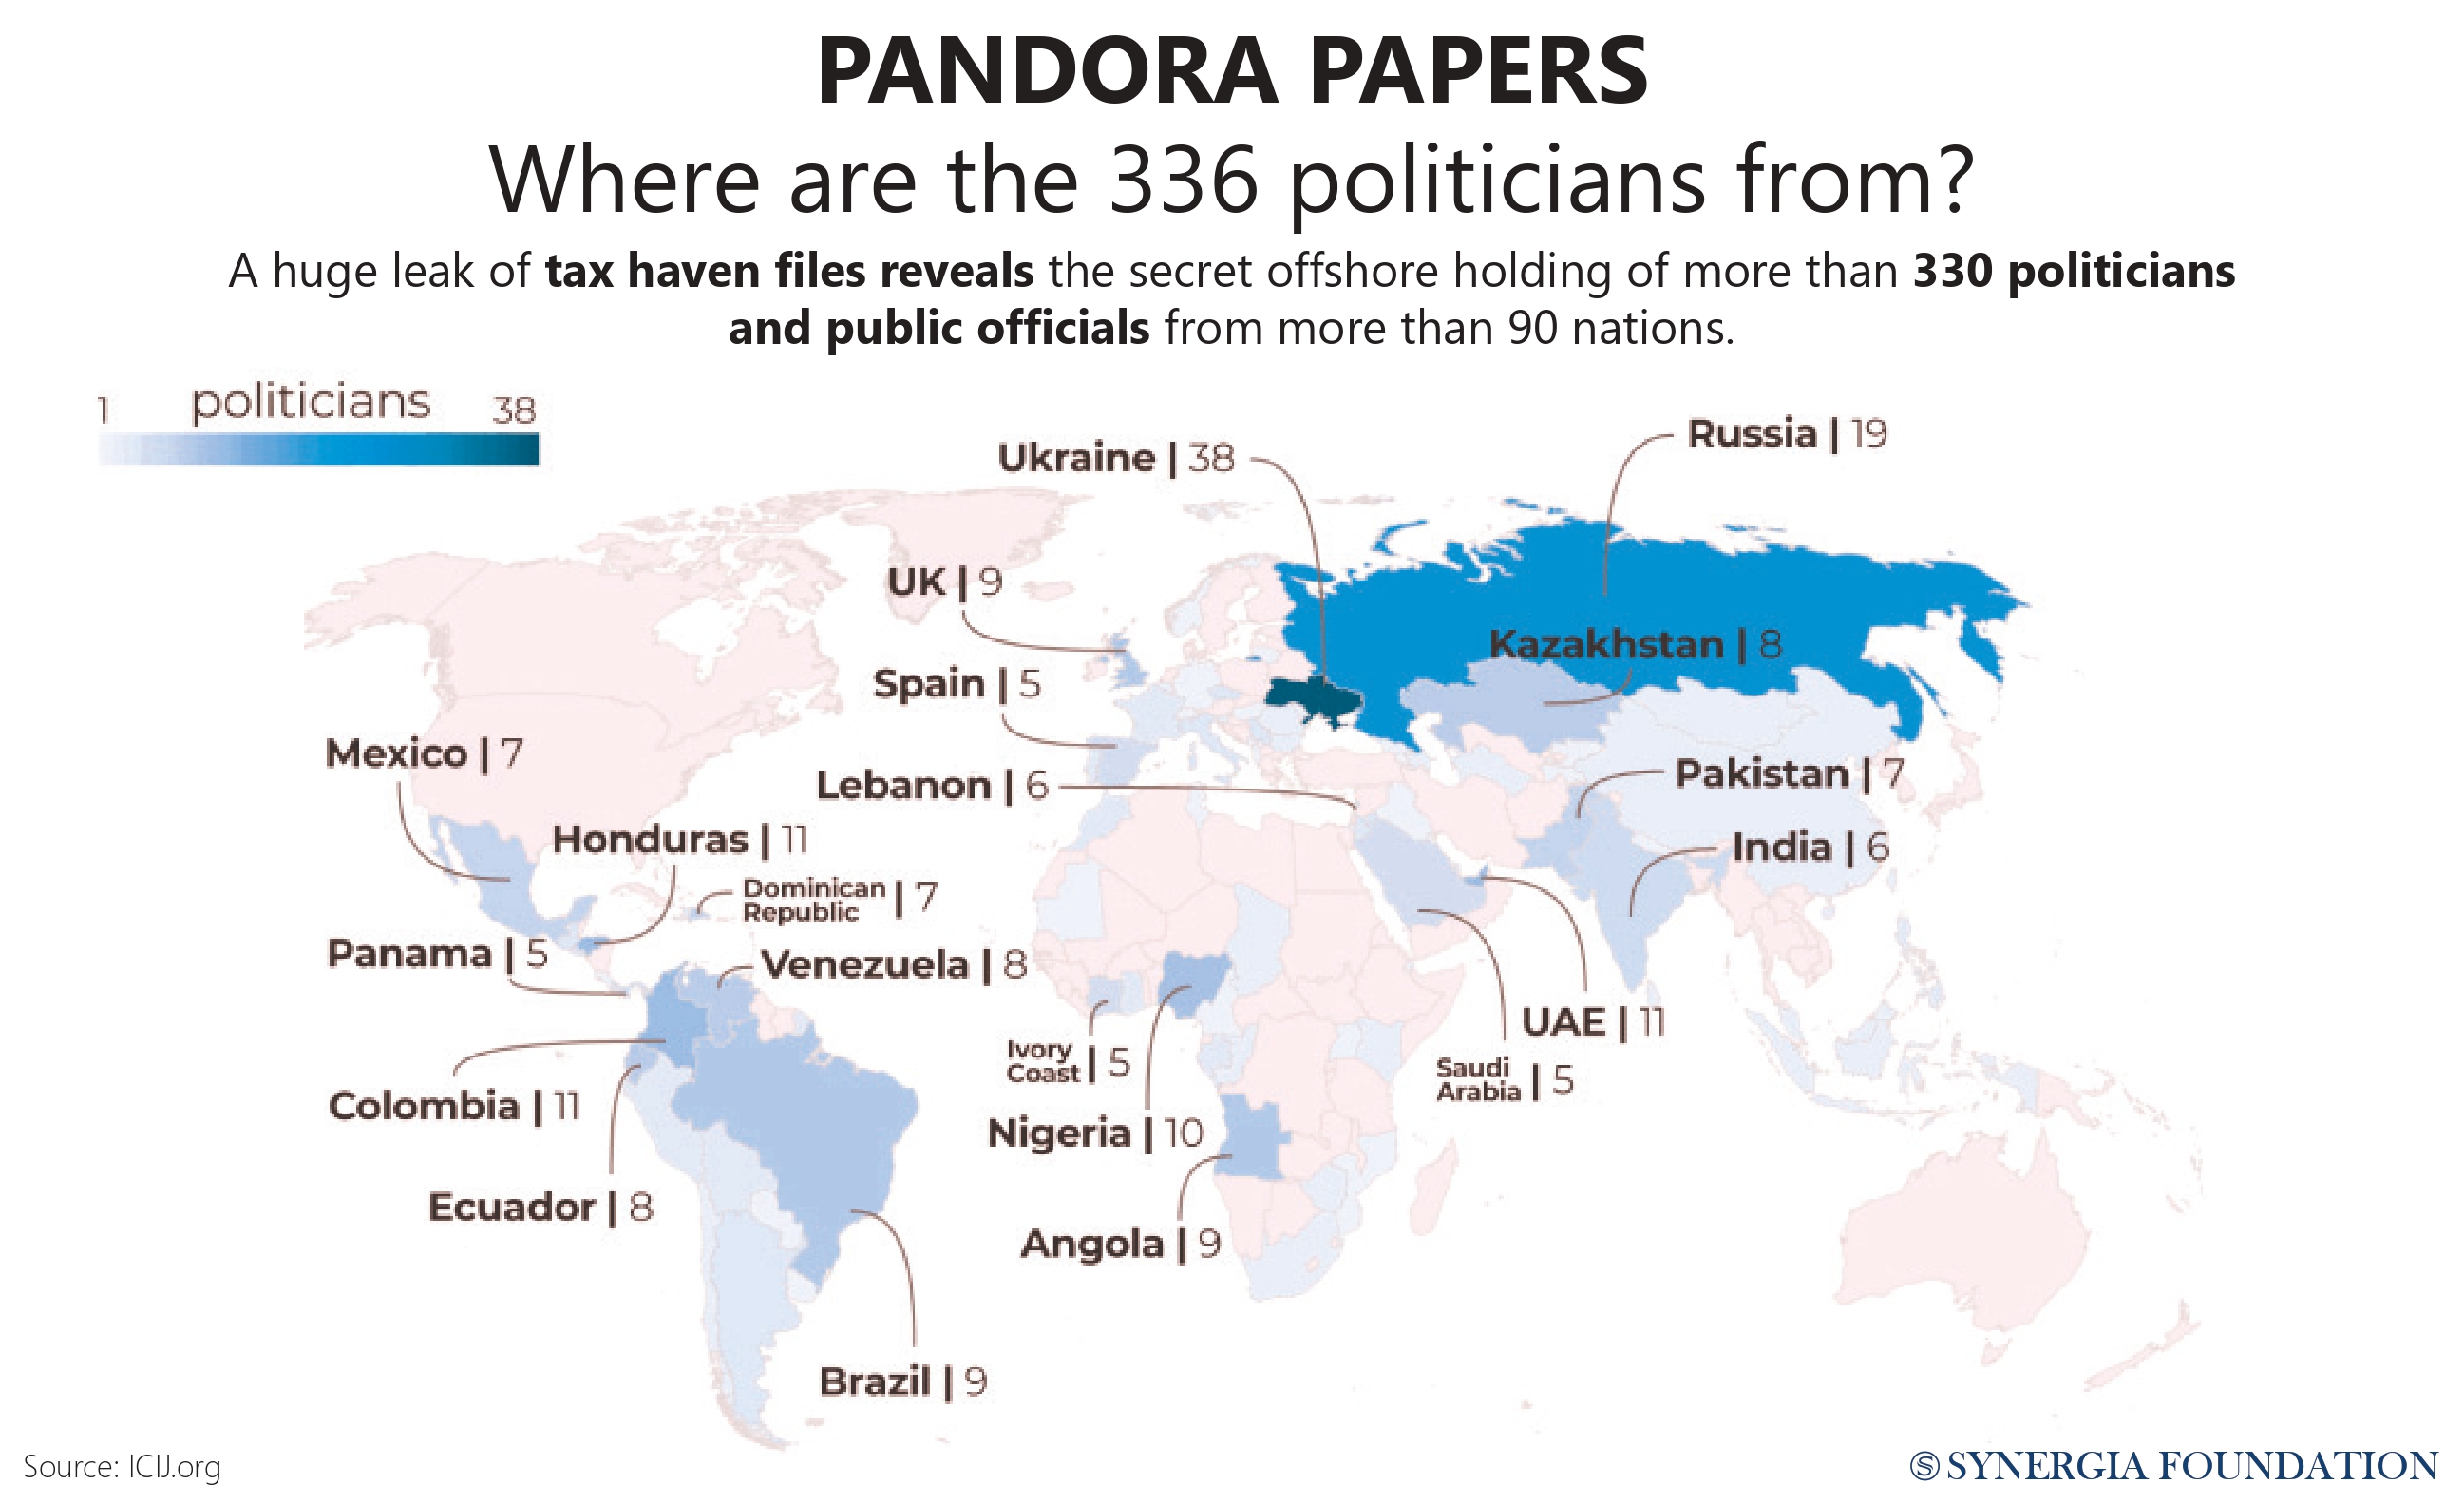 https://www.icij.org/investigations/pandora-papers/about-pandora-papers-leak-dataset/